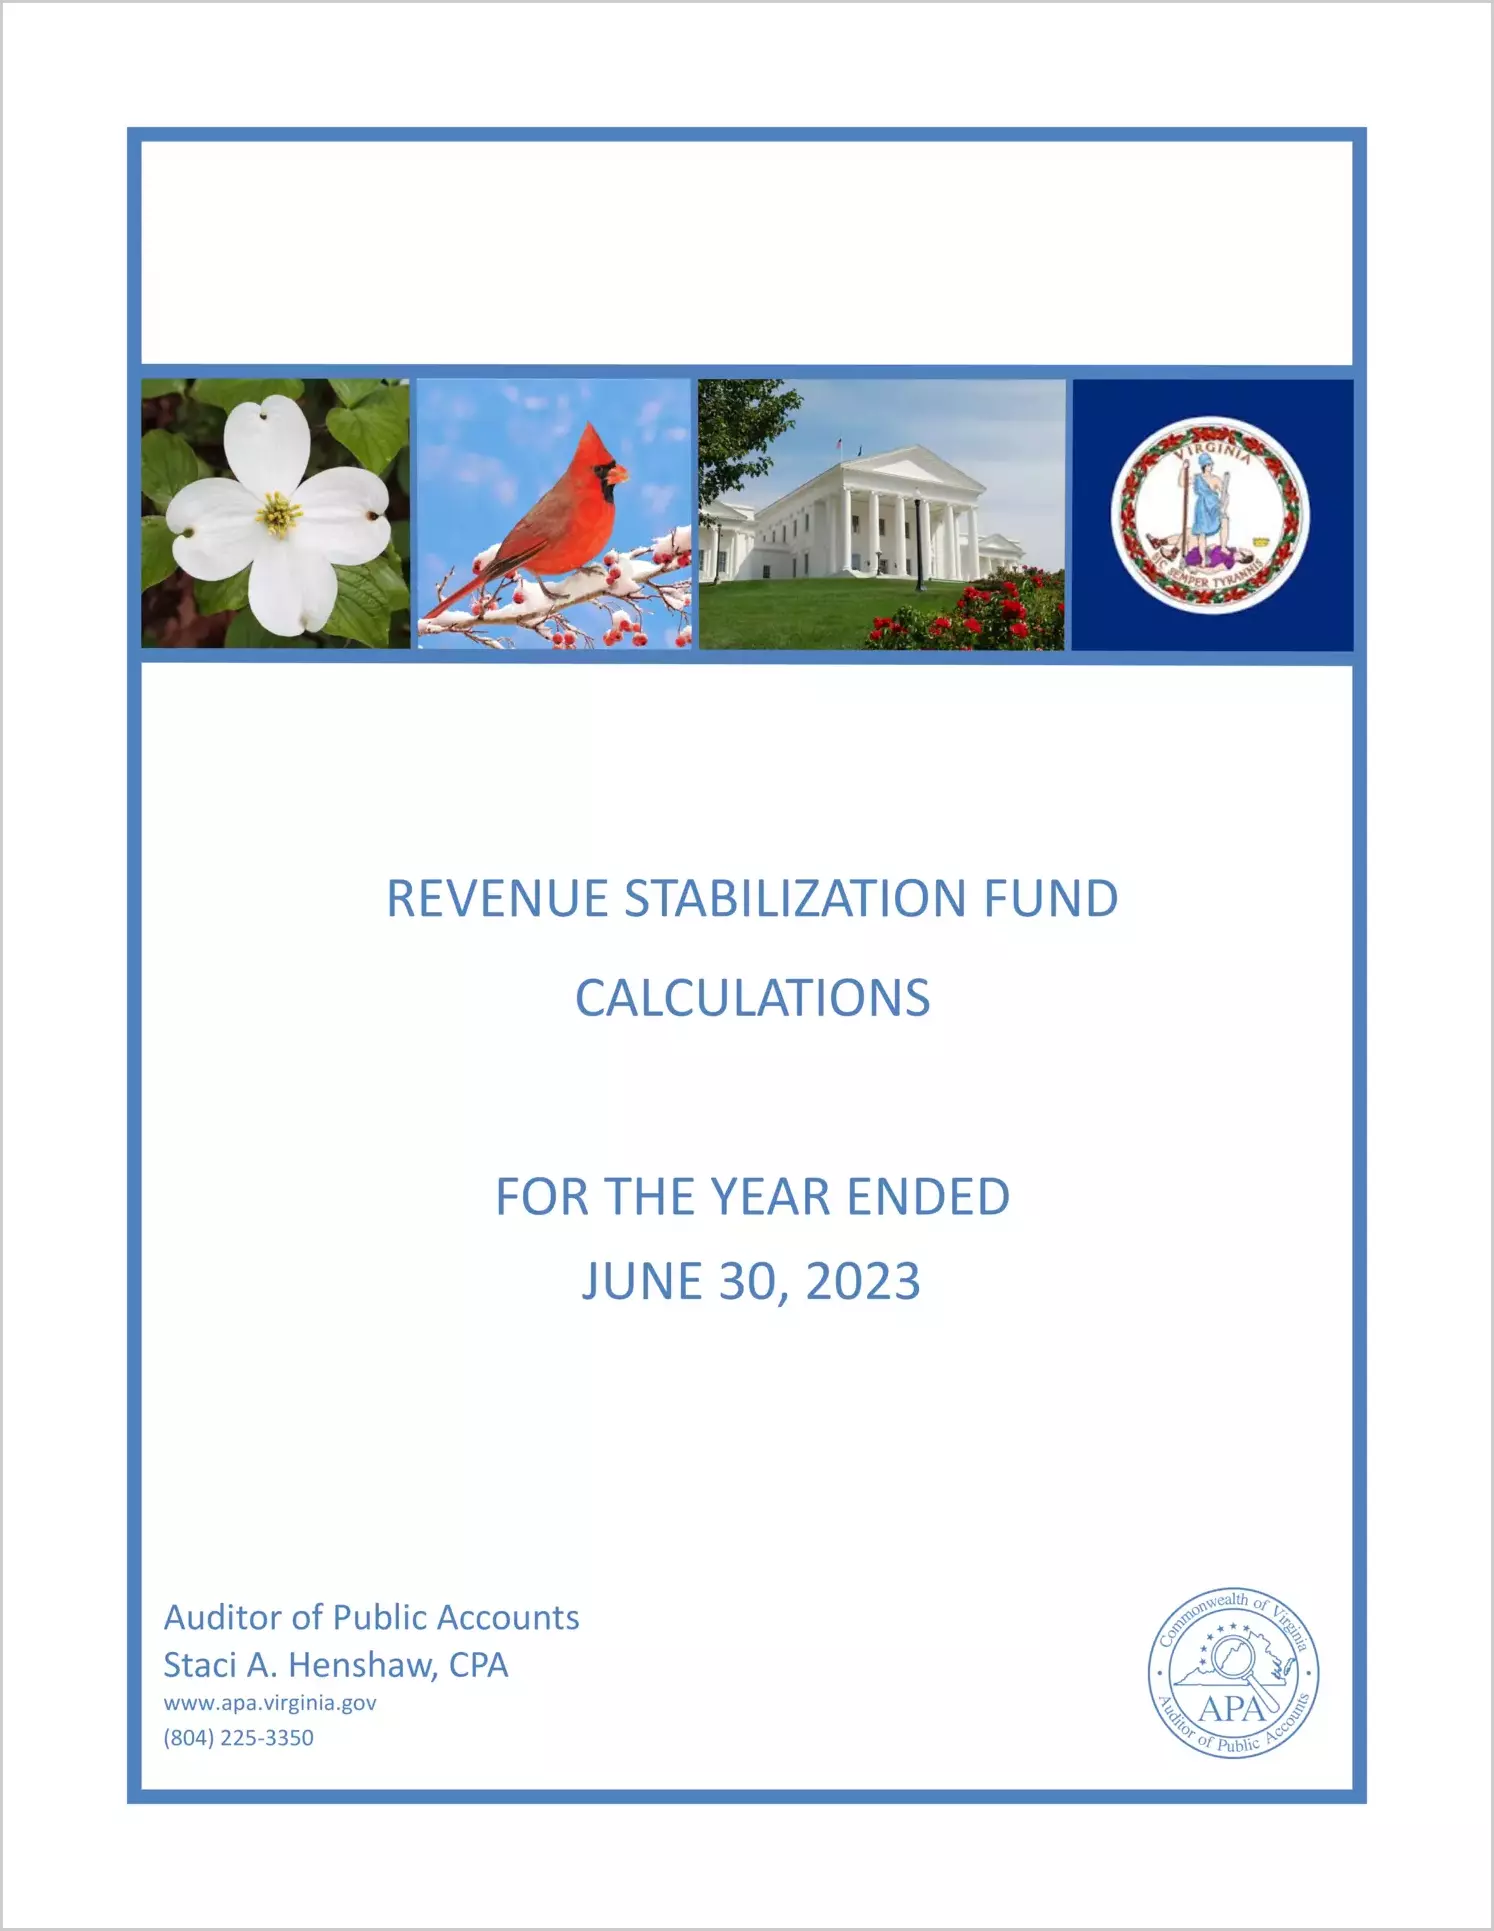 Revenue Stabilization Fund Calculations for the year ended June 30, 2023